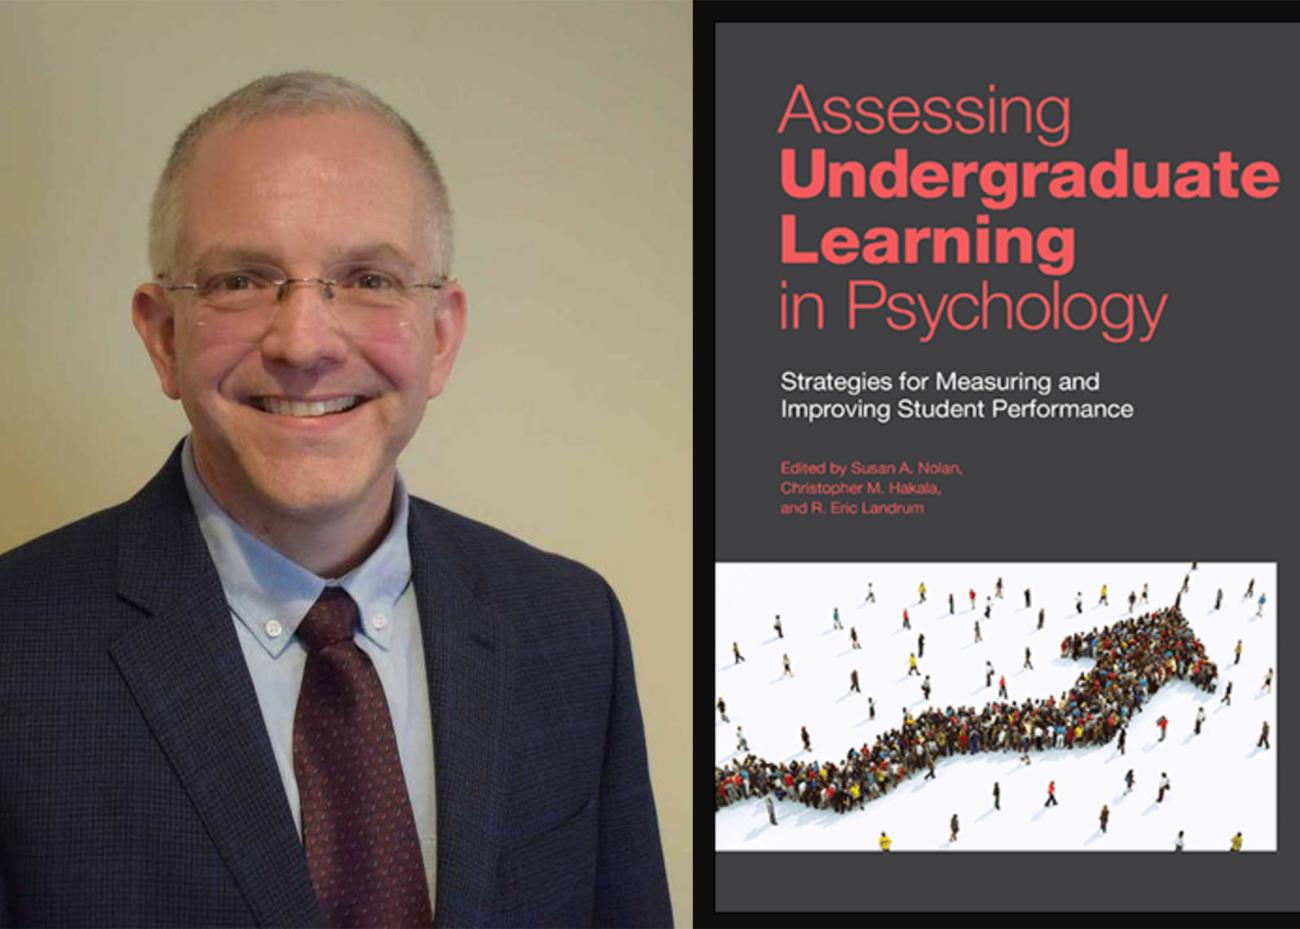 Hakala and his co-authors show how to develop assessments that undergraduate psychology faculty and administrators can use when designing pedagogies, courses, and curricula around student learning goals, including those identified by APA’s Guidelines for the Undergraduate Psychology Major.